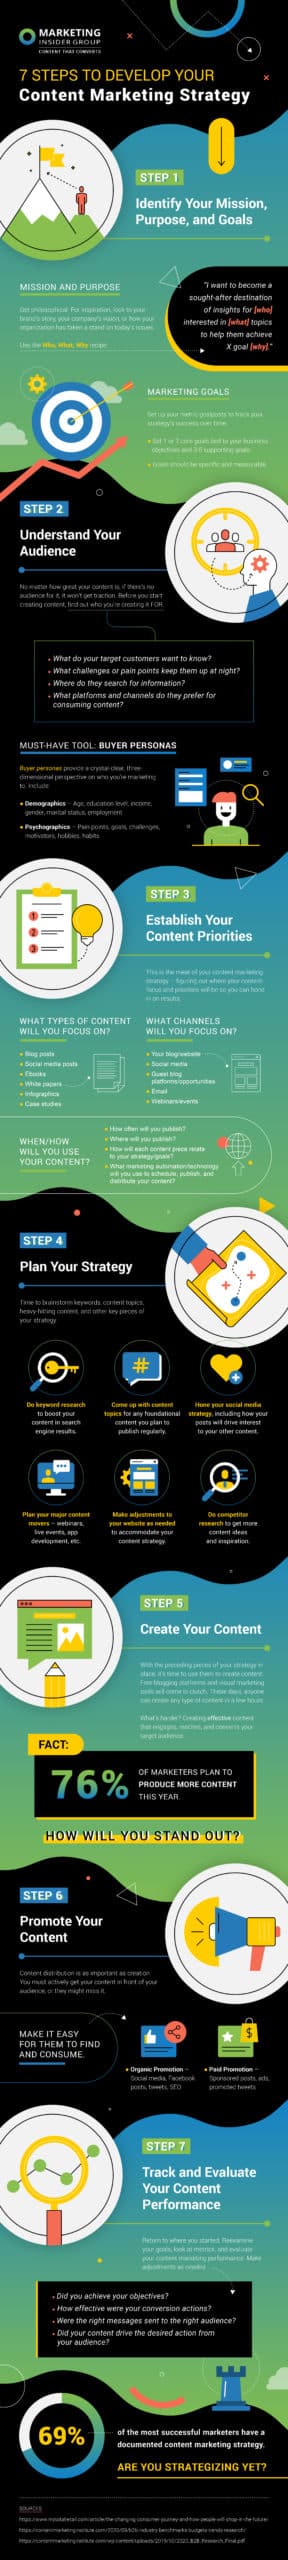 Infographic describing 7 steps to content marketing strategy